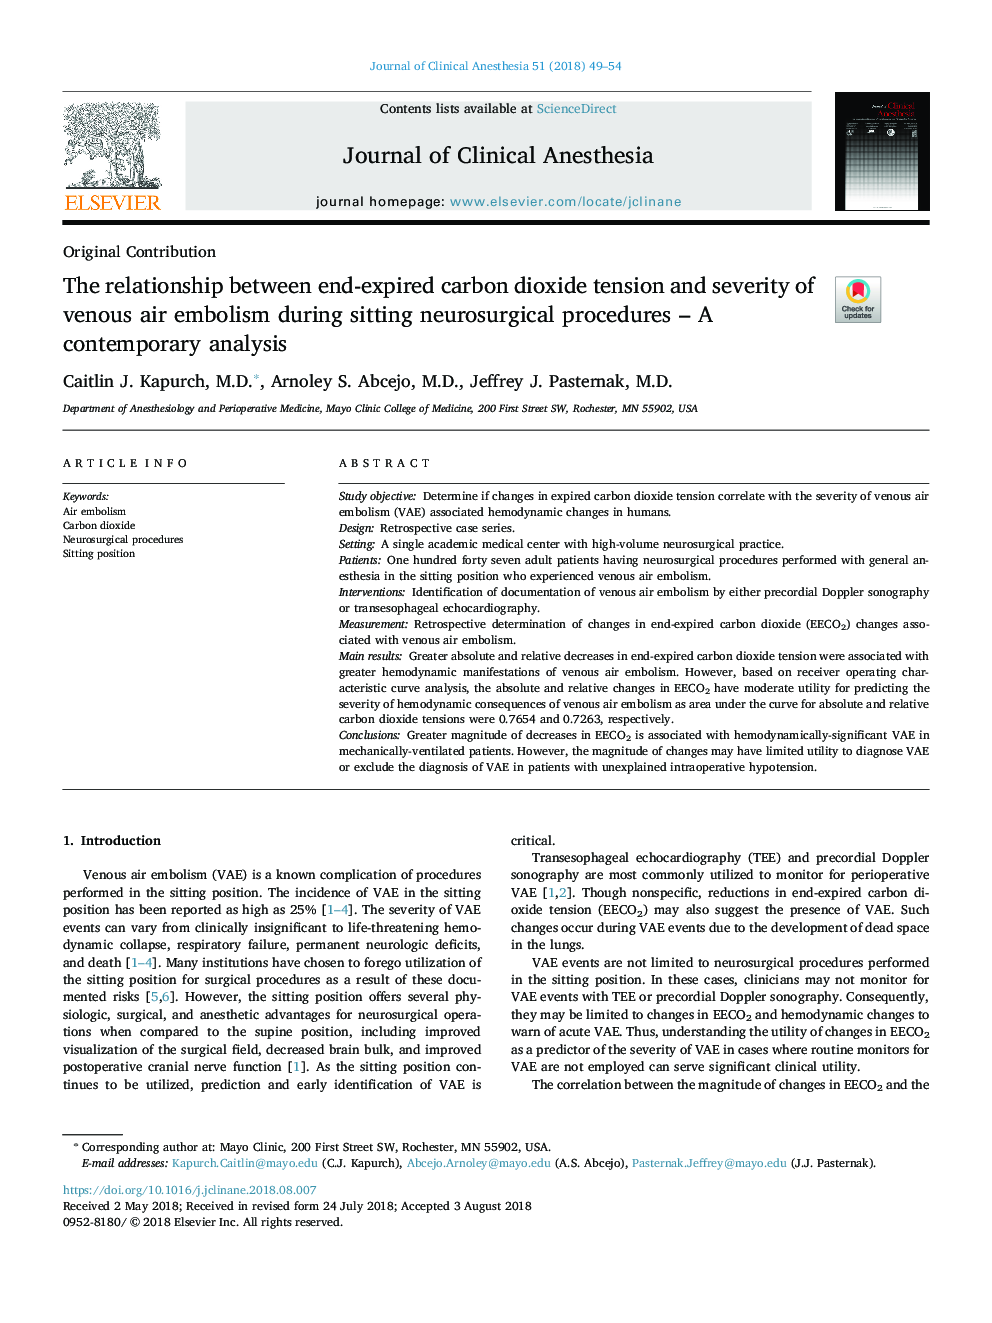 The relationship between end-expired carbon dioxide tension and severity of venous air embolism during sitting neurosurgical procedures - A contemporary analysis